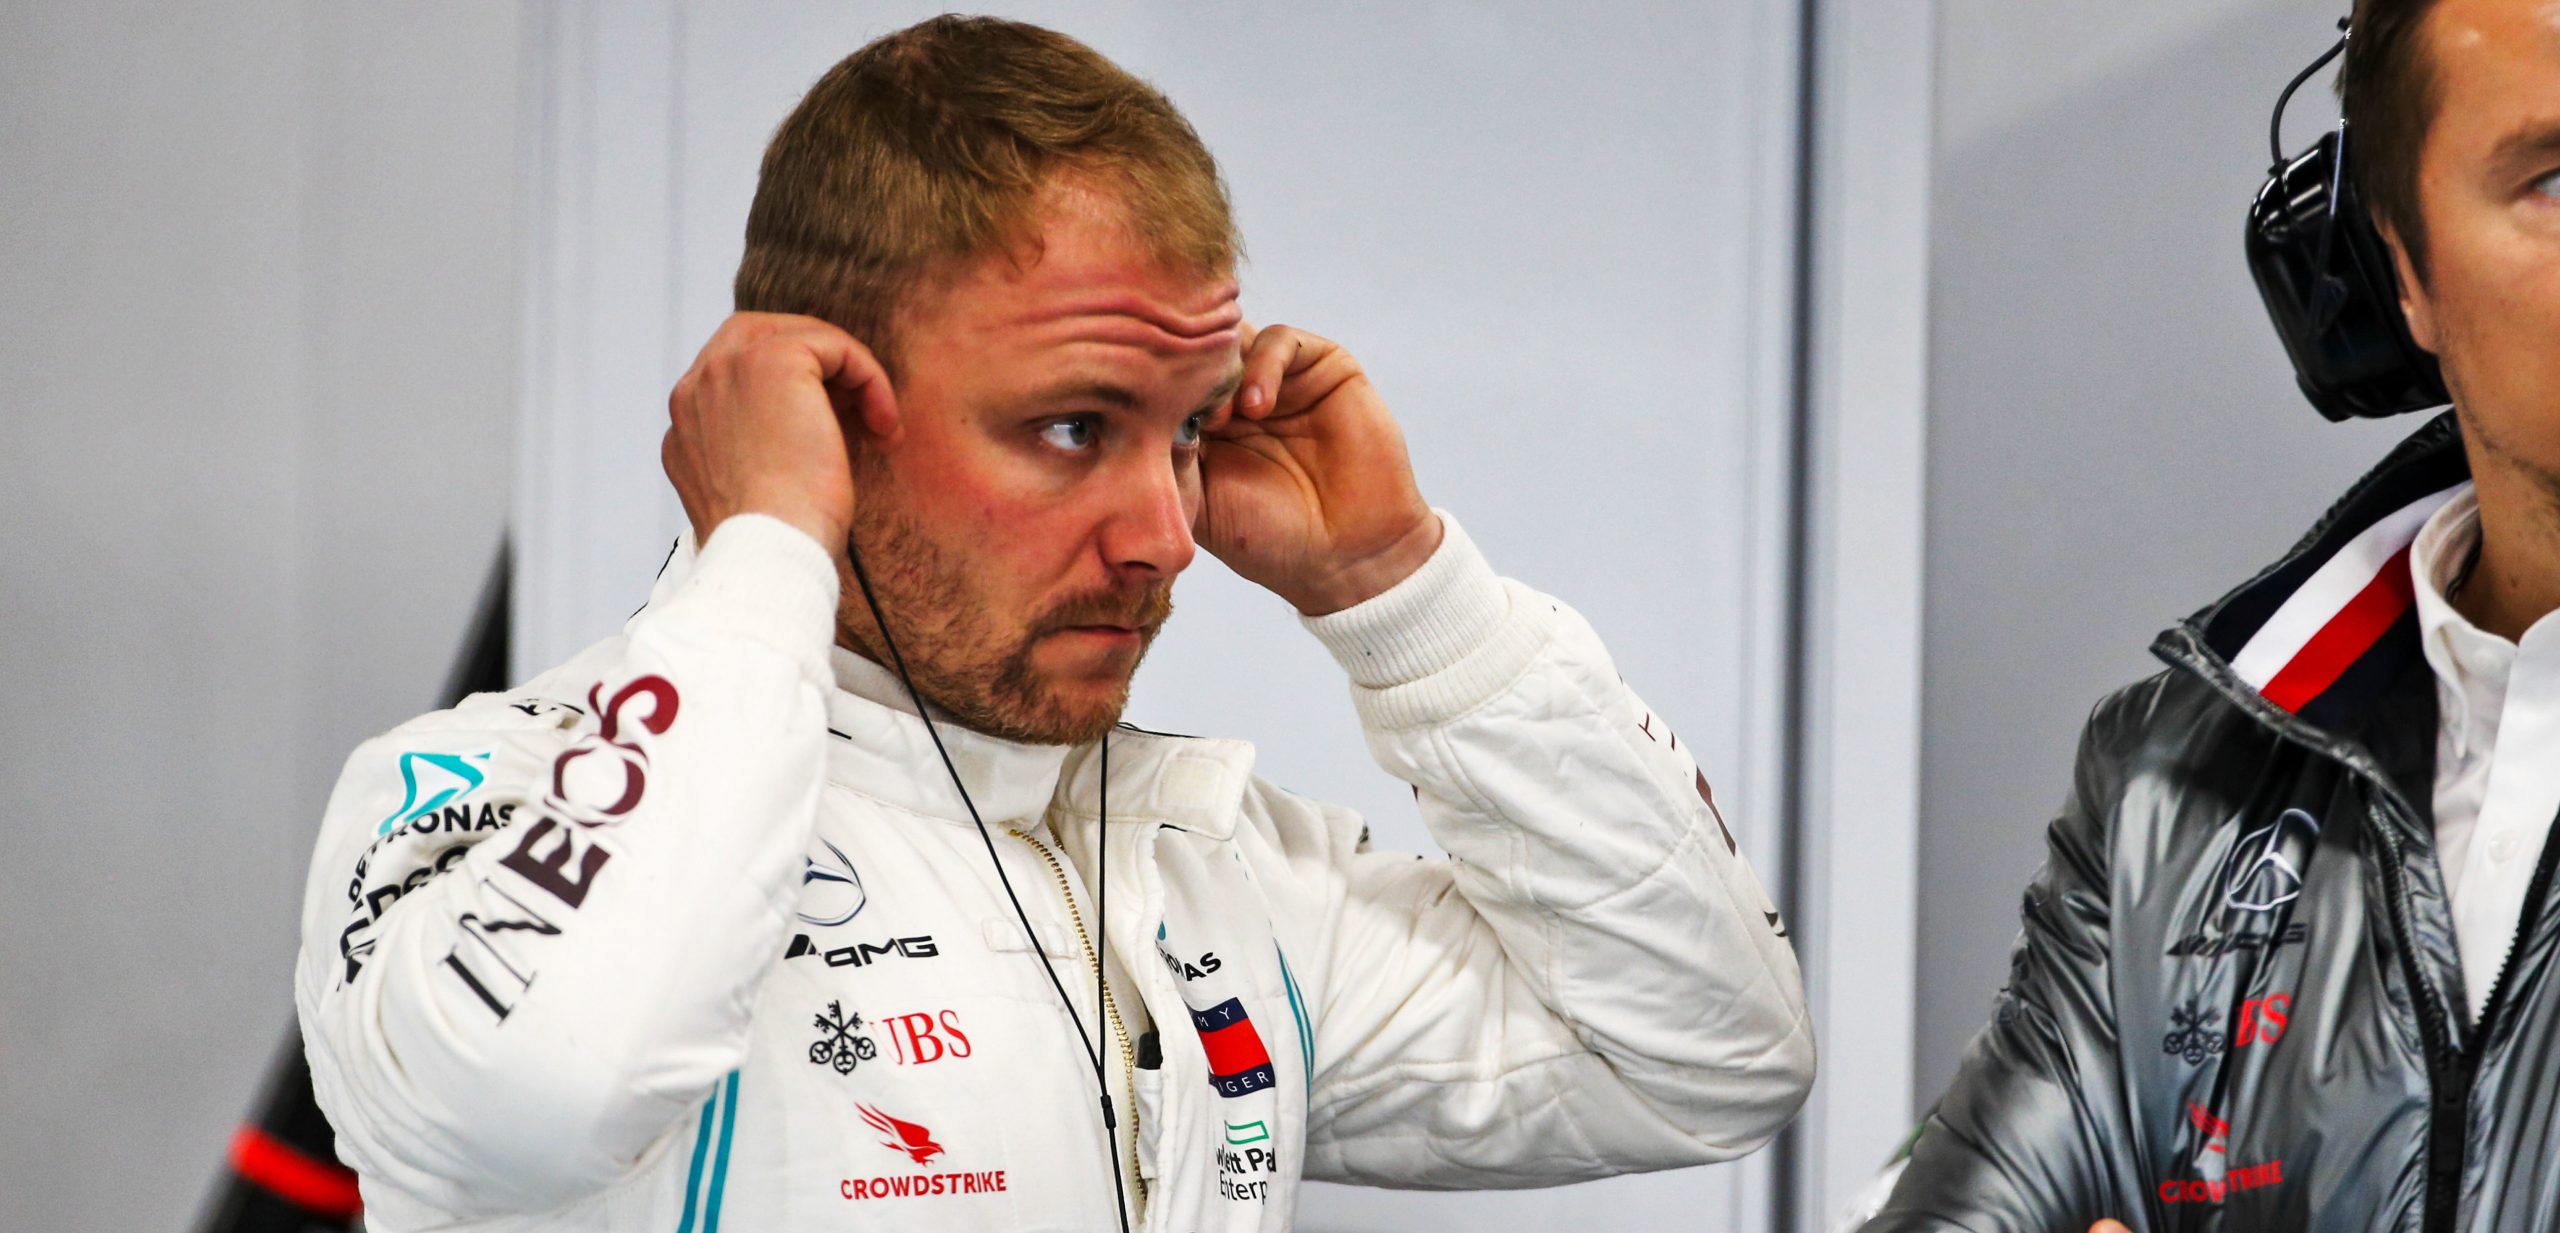 Mercedes-AMG Petronas Formula One Team's Finish rider Valteri Bottas will try to finally outshine his teammate